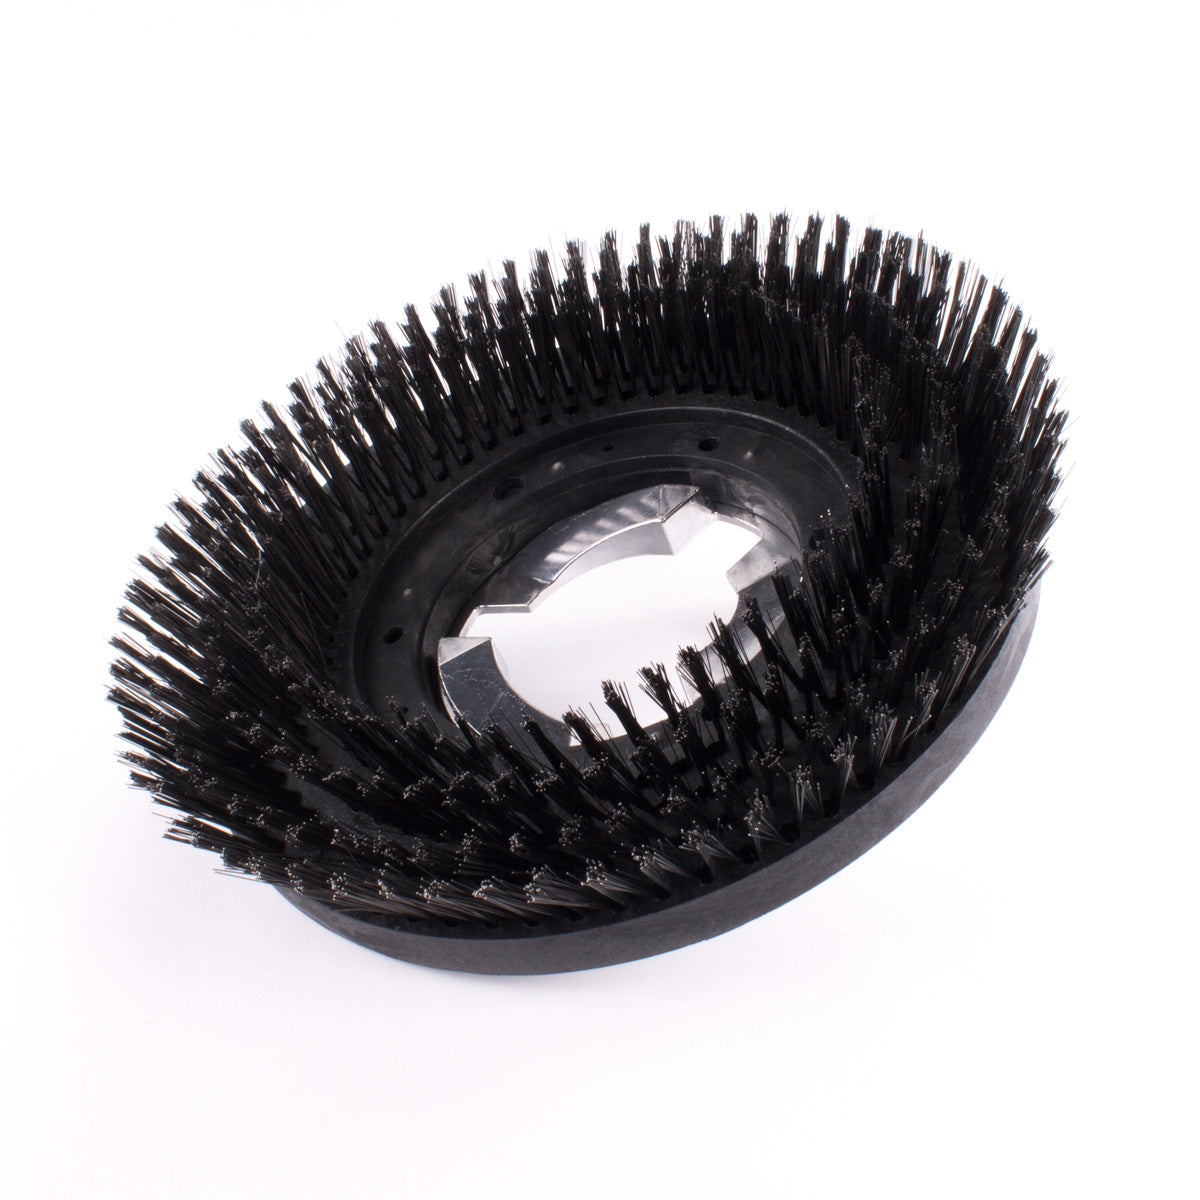 Replacement Line Scrub Brush & other Court Maintenance